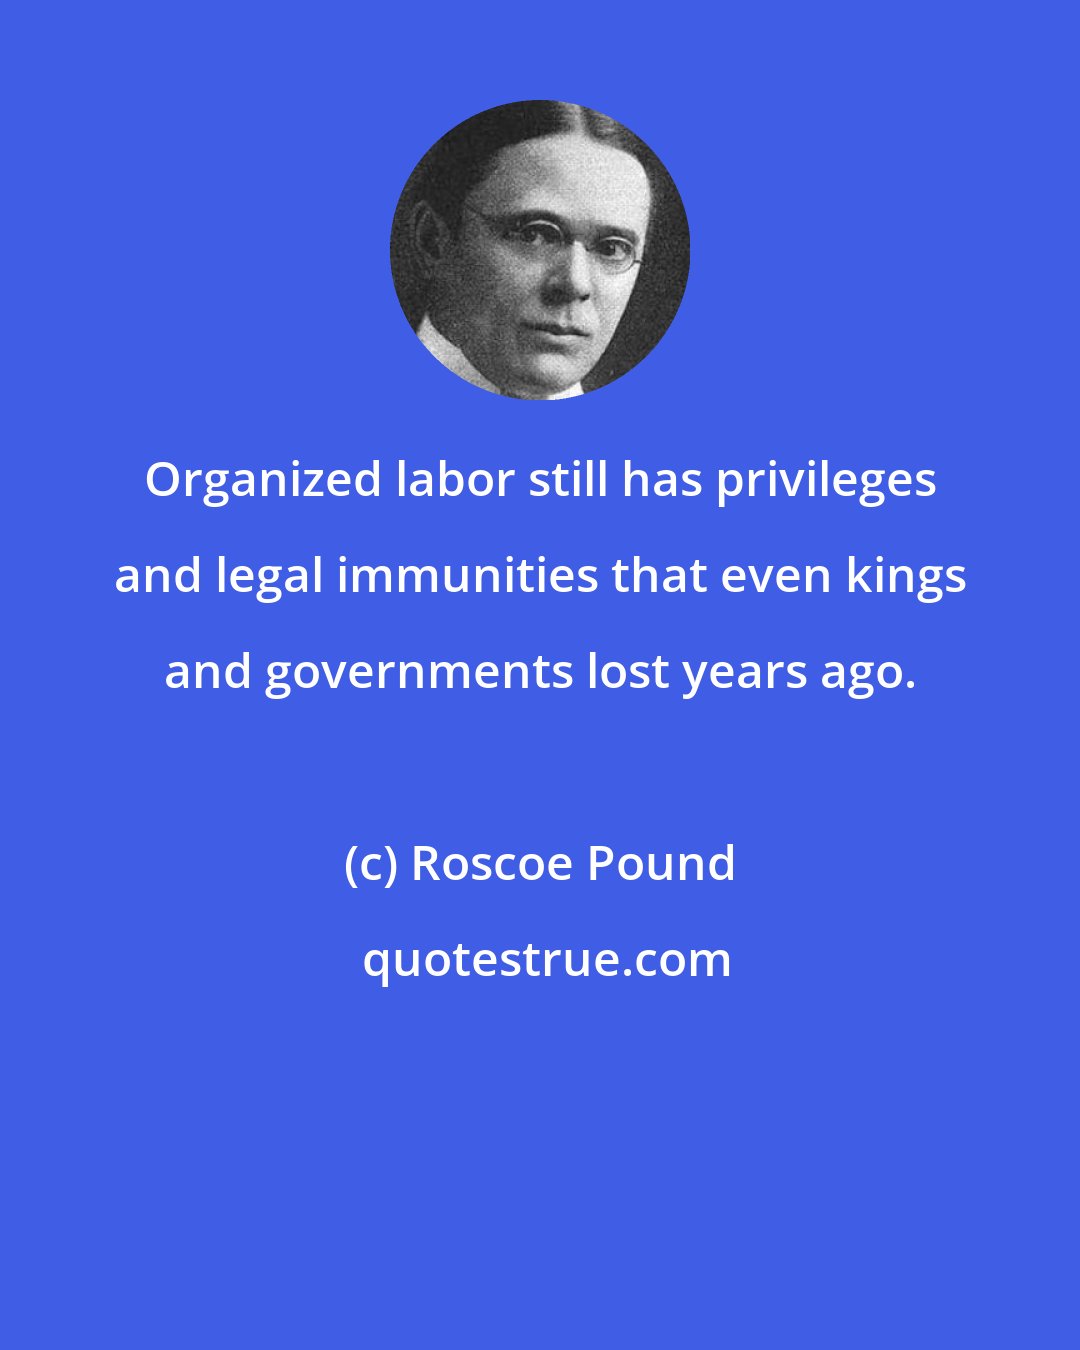 Roscoe Pound: Organized labor still has privileges and legal immunities that even kings and governments lost years ago.